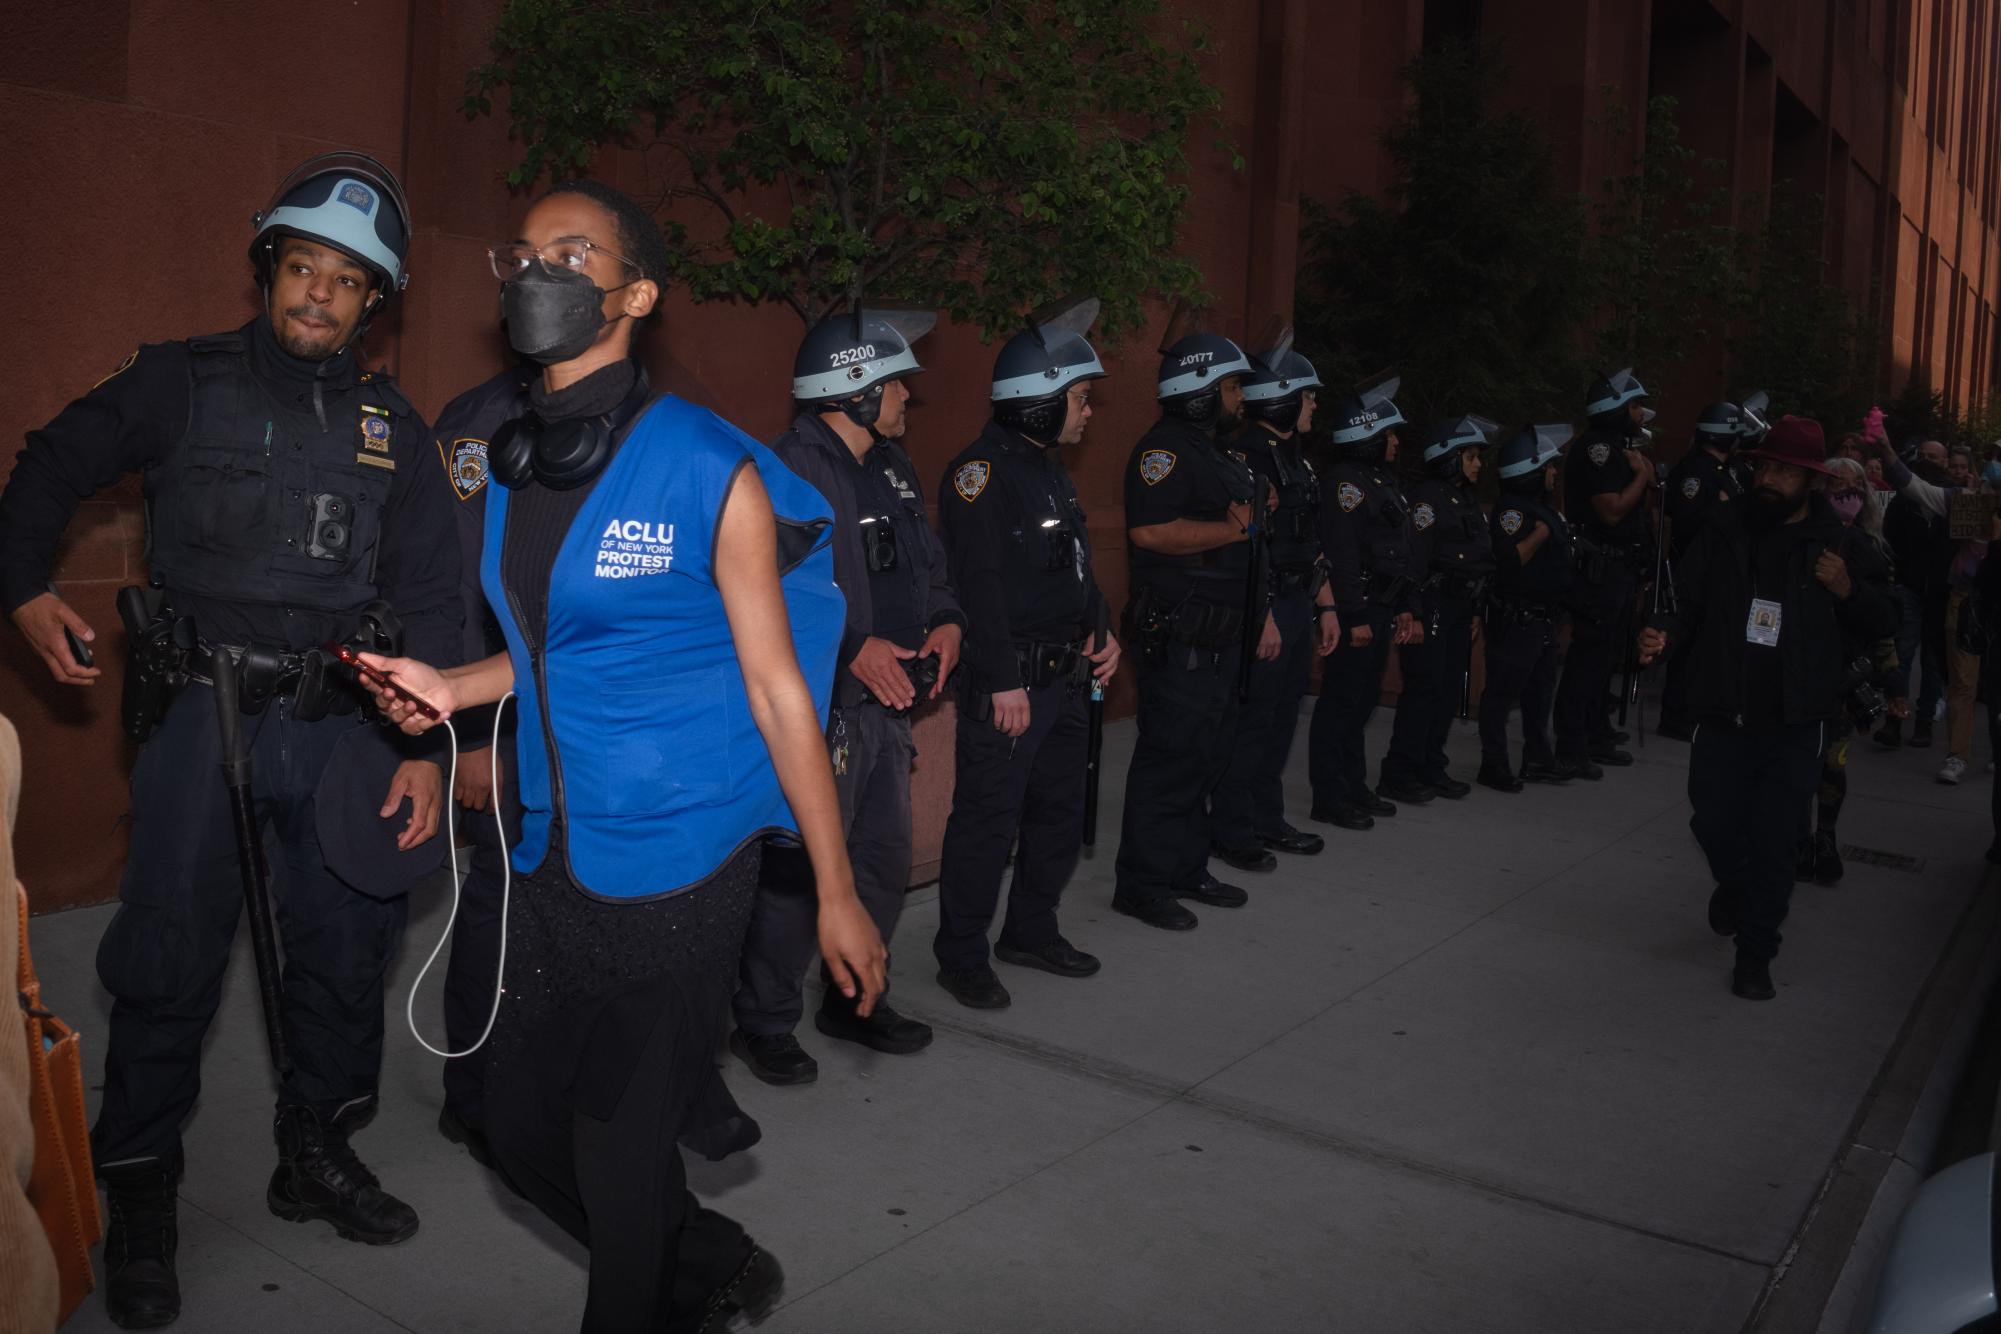 An A.C.LU. legal observer run alongside a line of police in riot gear outside Bobst Library.